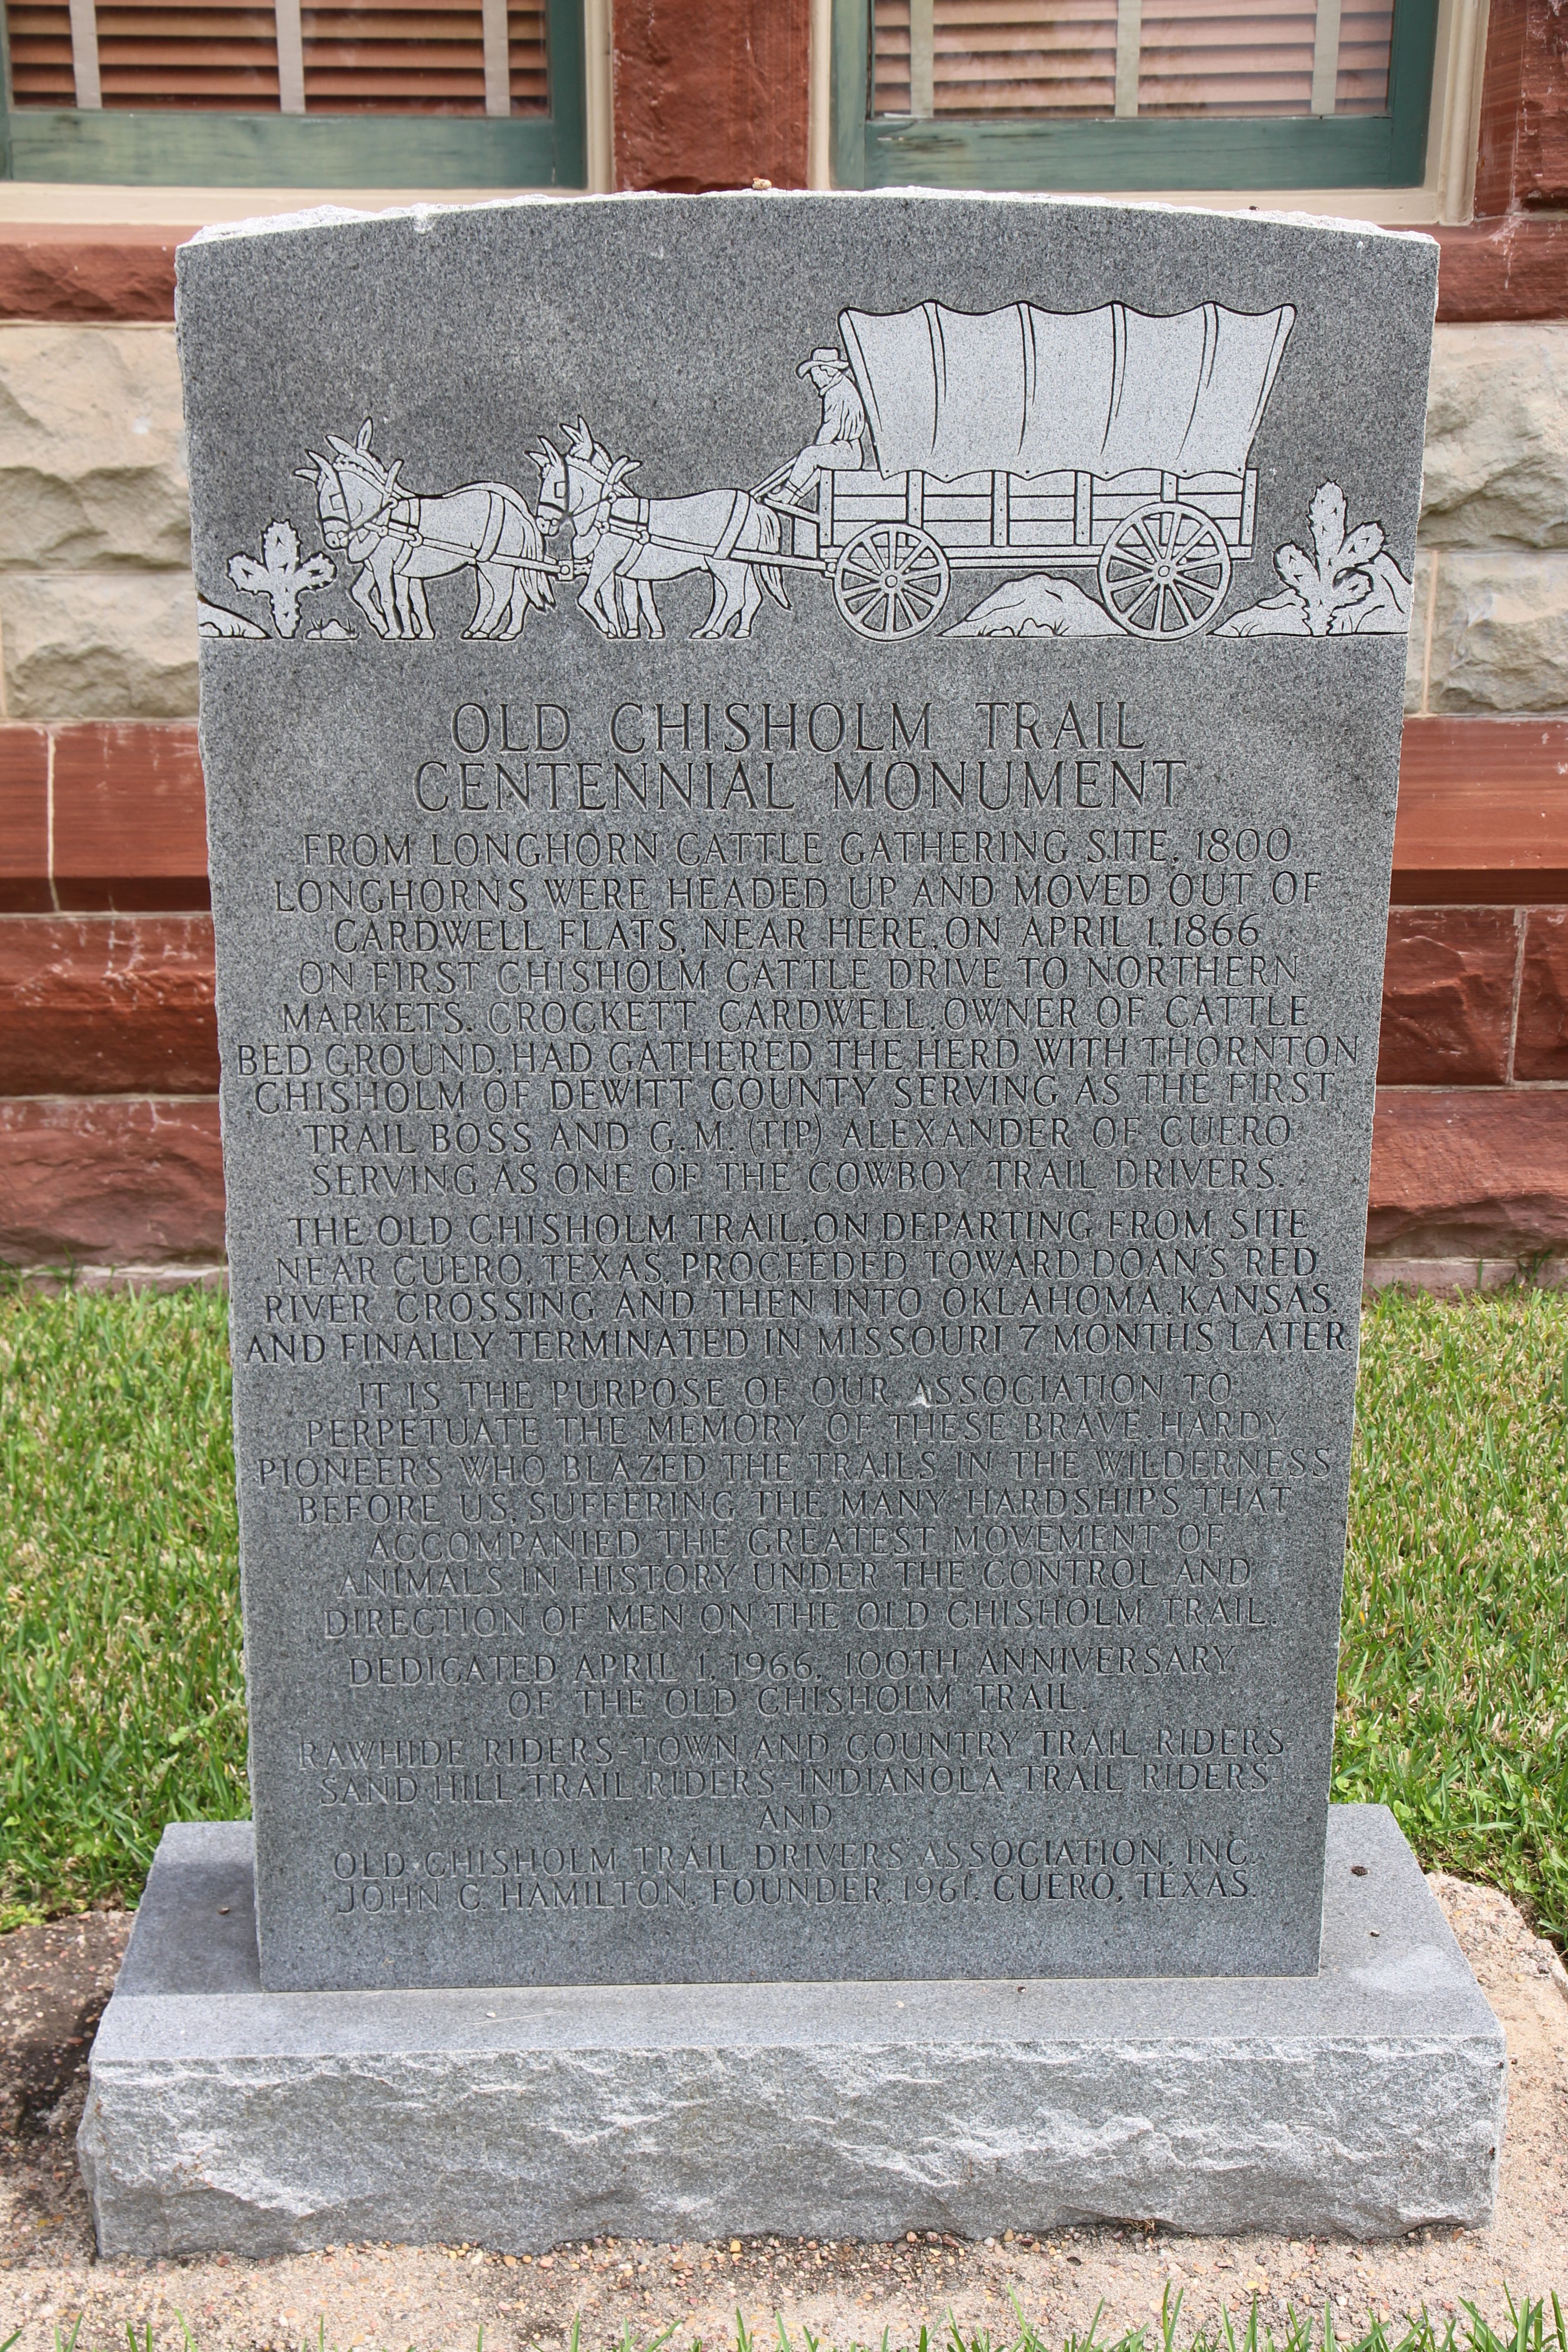 Old Chisholm Trail Centennial Monument